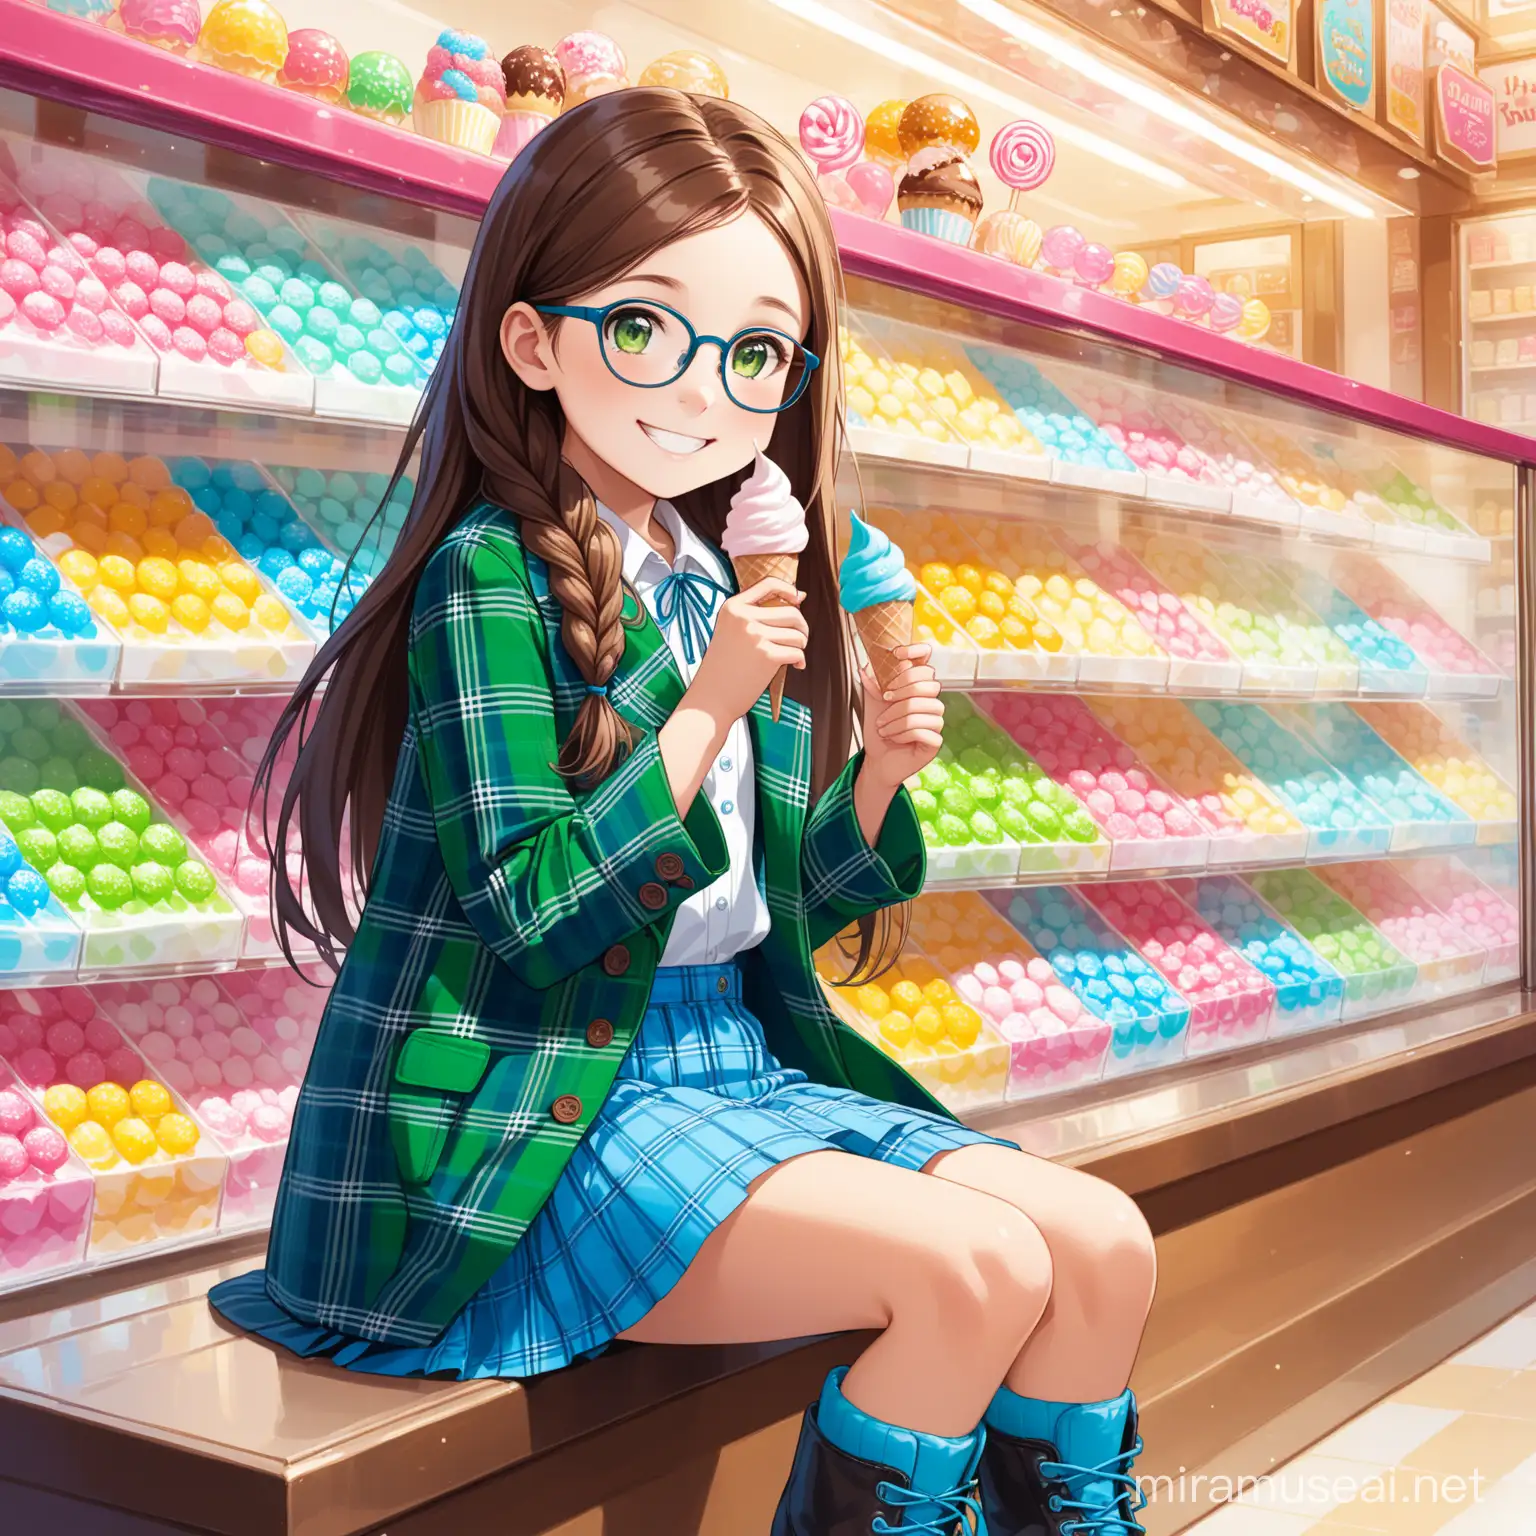 11 year old girl, long brown hair in a thick braid, green eyes, smiling, black glasses, long green and blue tartan coat, white shirt, blue skirt, eating candy and ice cream, smiling, blue laced up boots, sitting in a candy shop, 